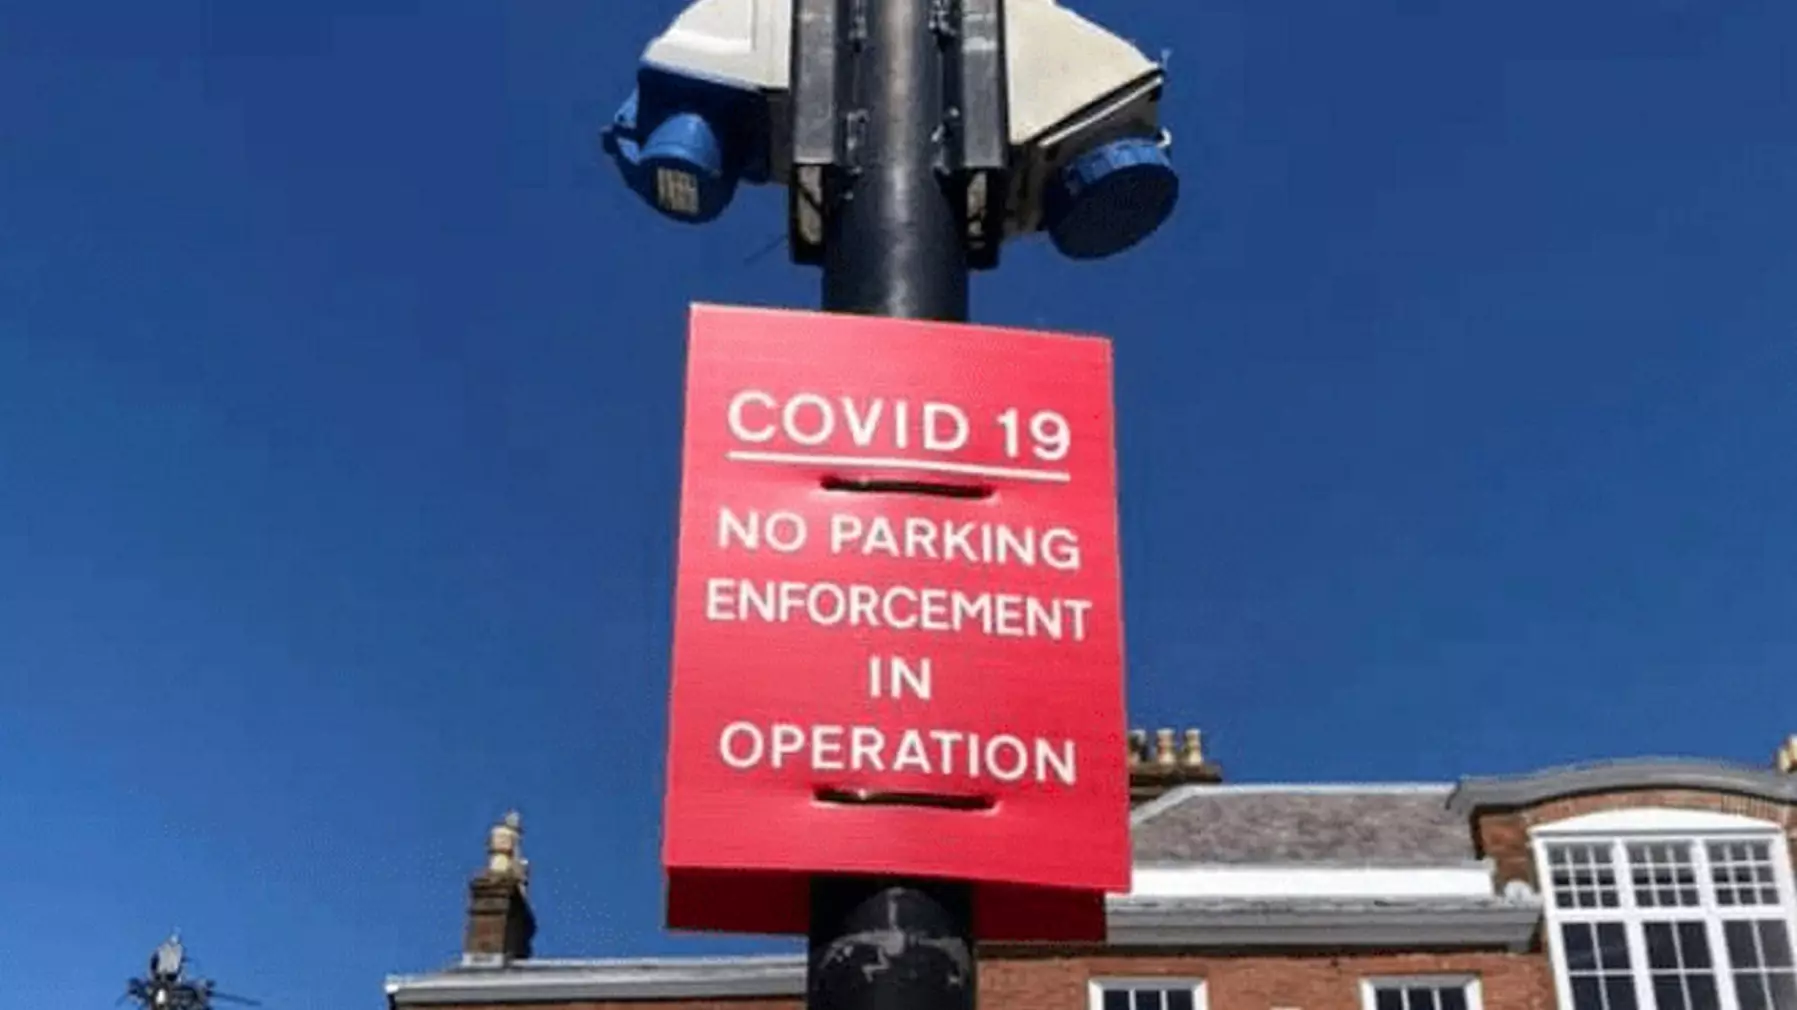 Council Puts Up Grammatically Incorrect Signs, Confusing Motorists  